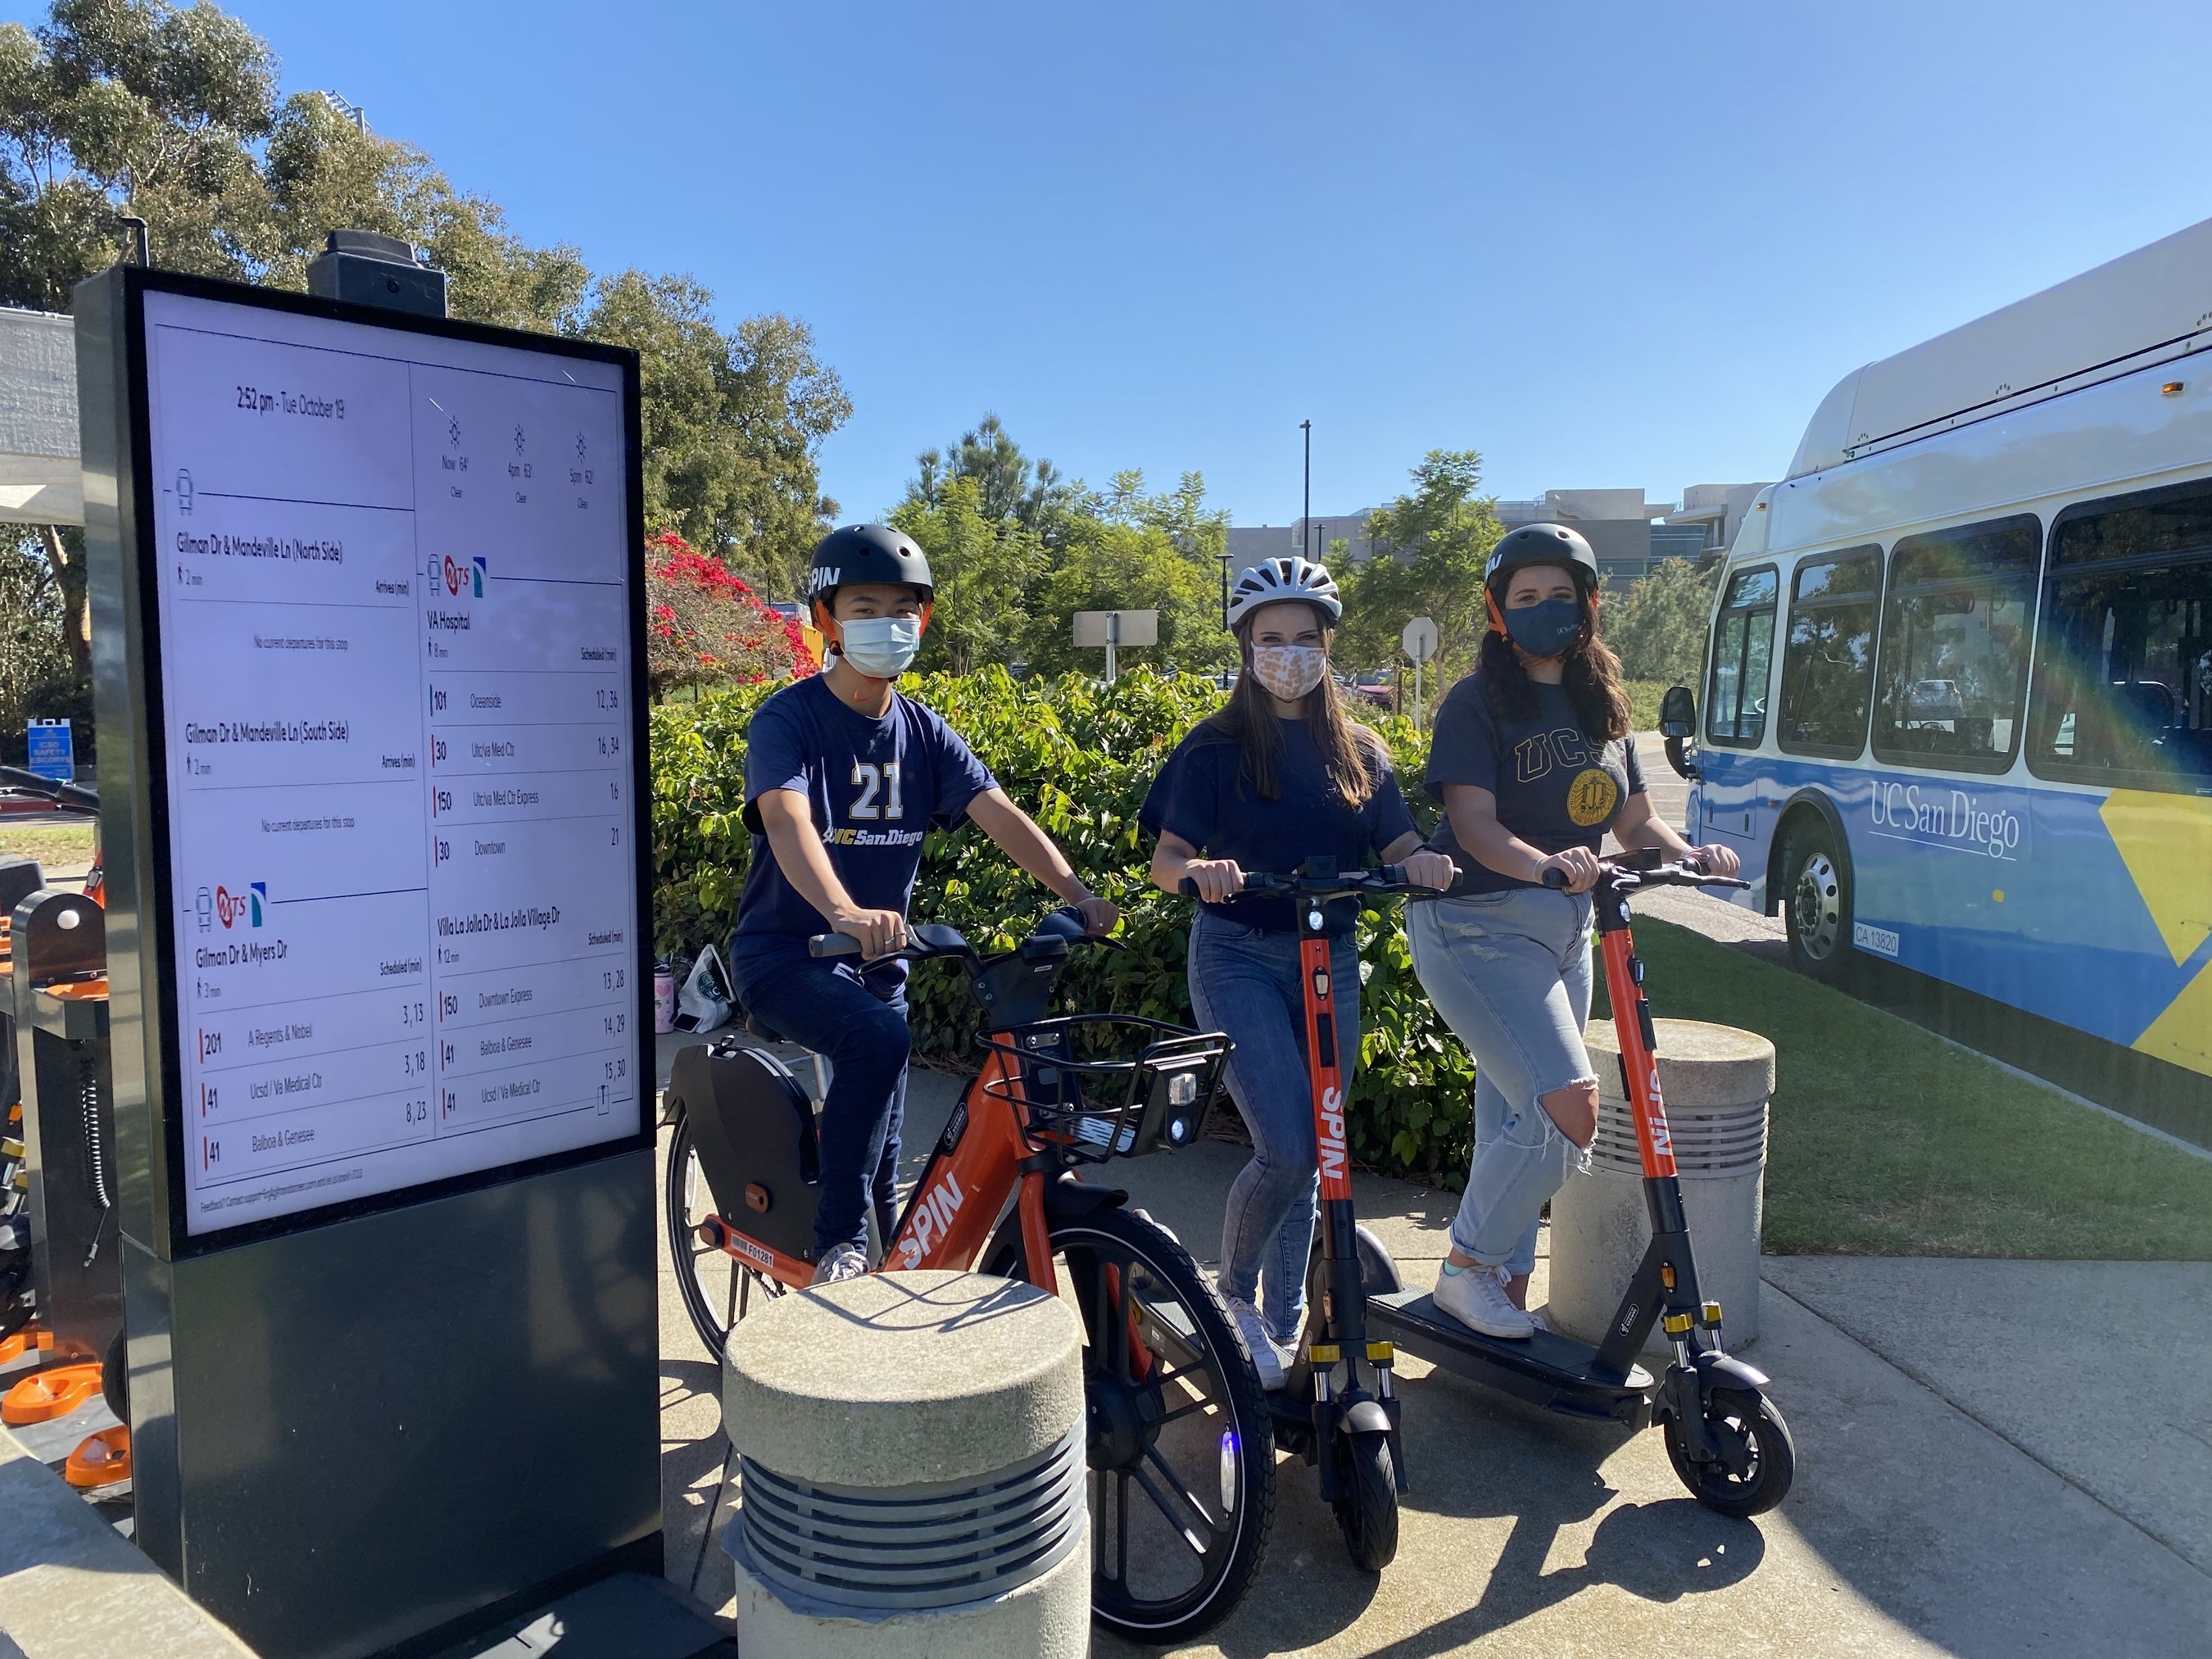 UC San Diego students next to Spin Hub, where a live map of bus locations (powered by TransLoc technology) are displayed.